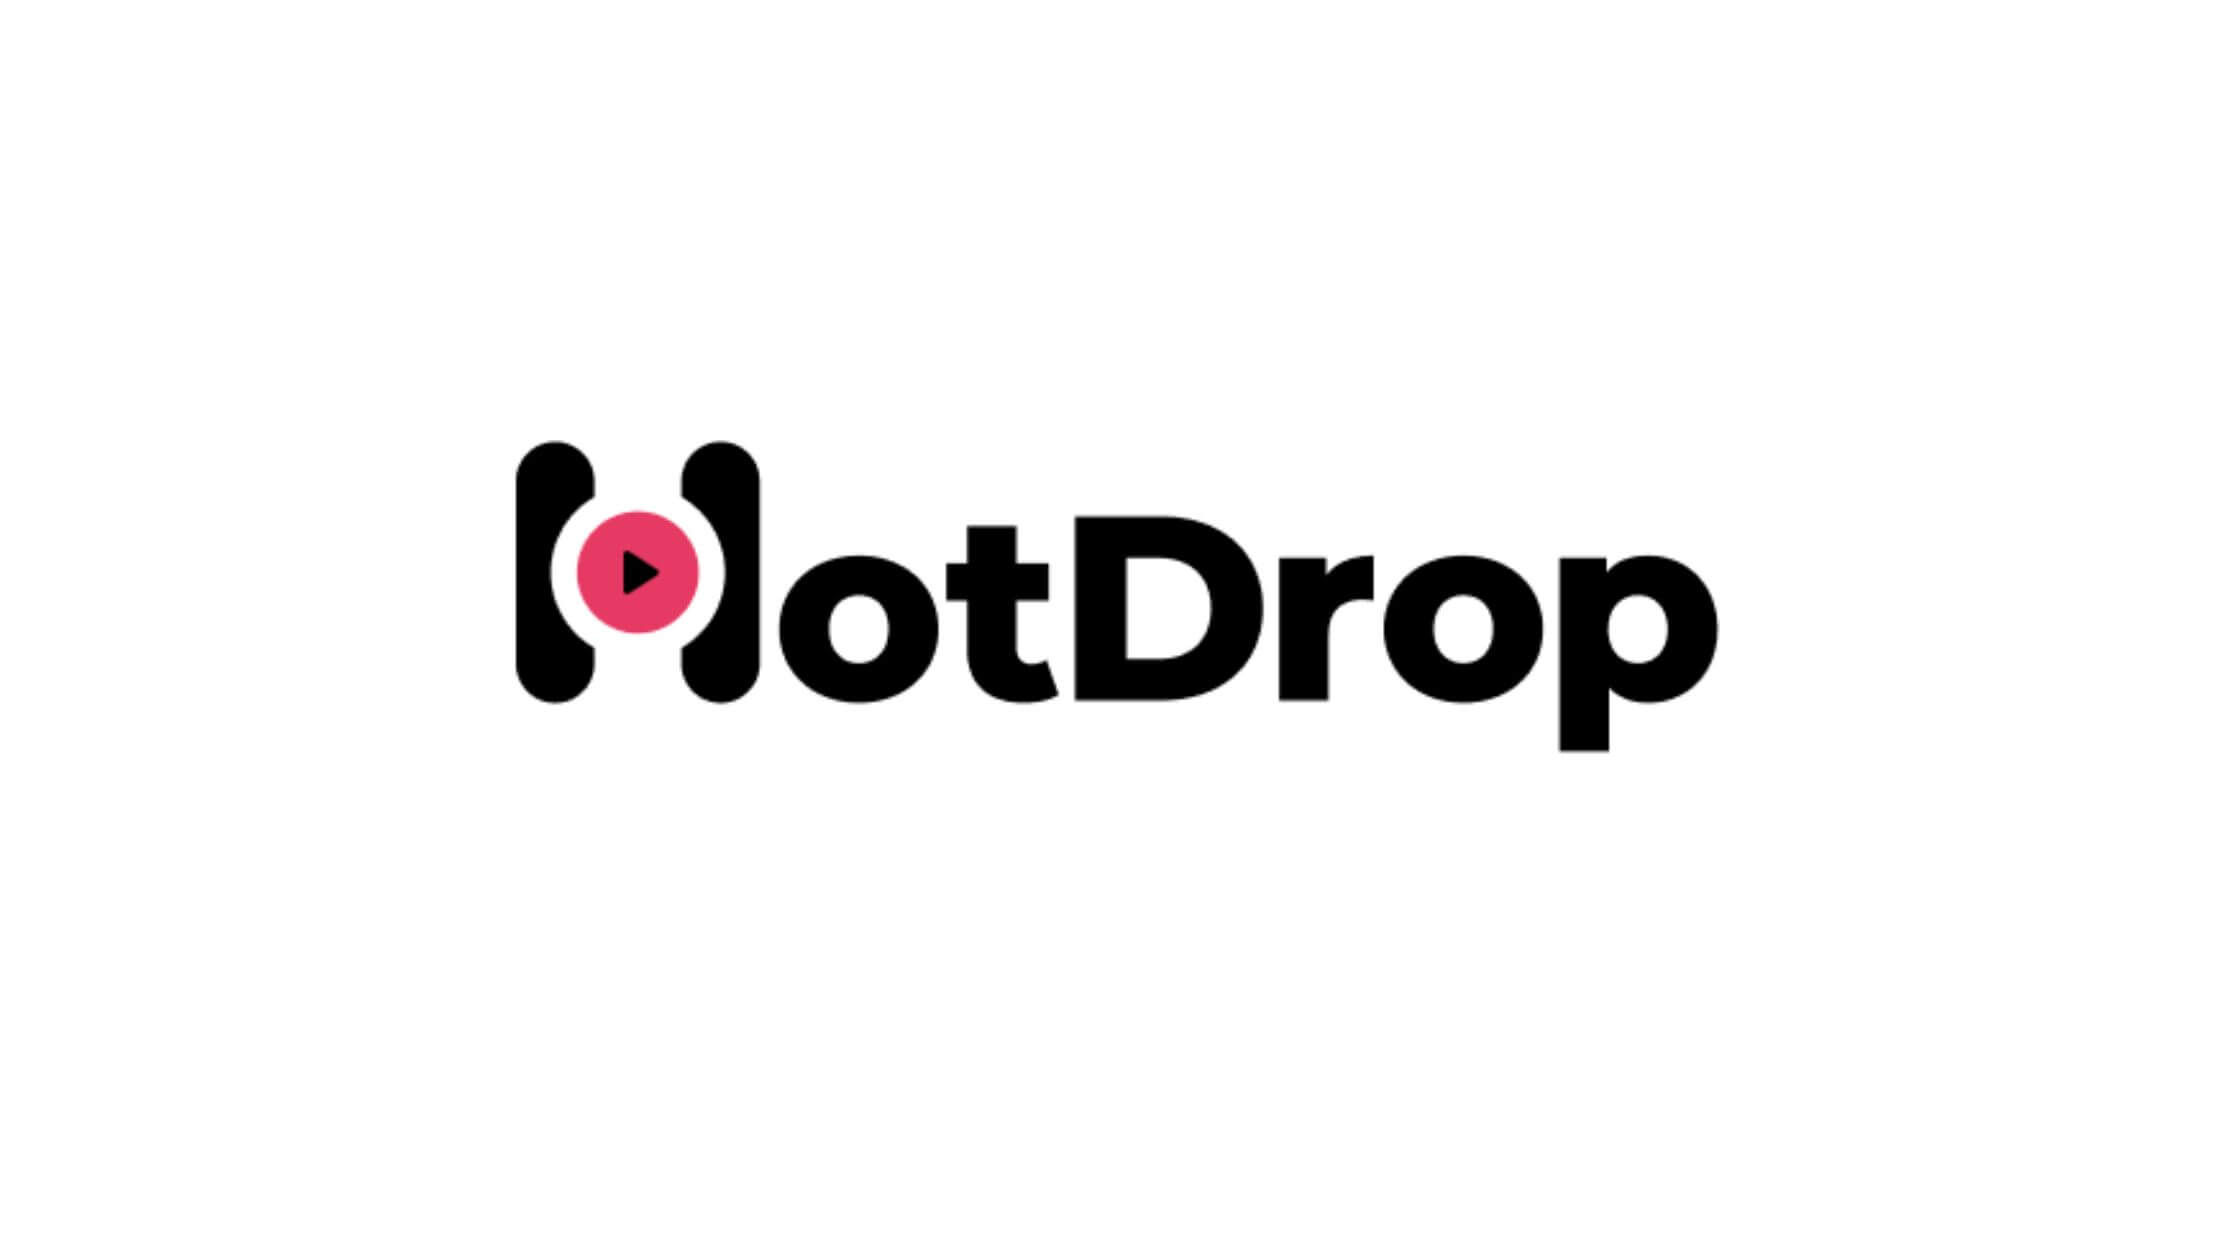 Music discovery app HotDrop launches new features for artists and listeners alike